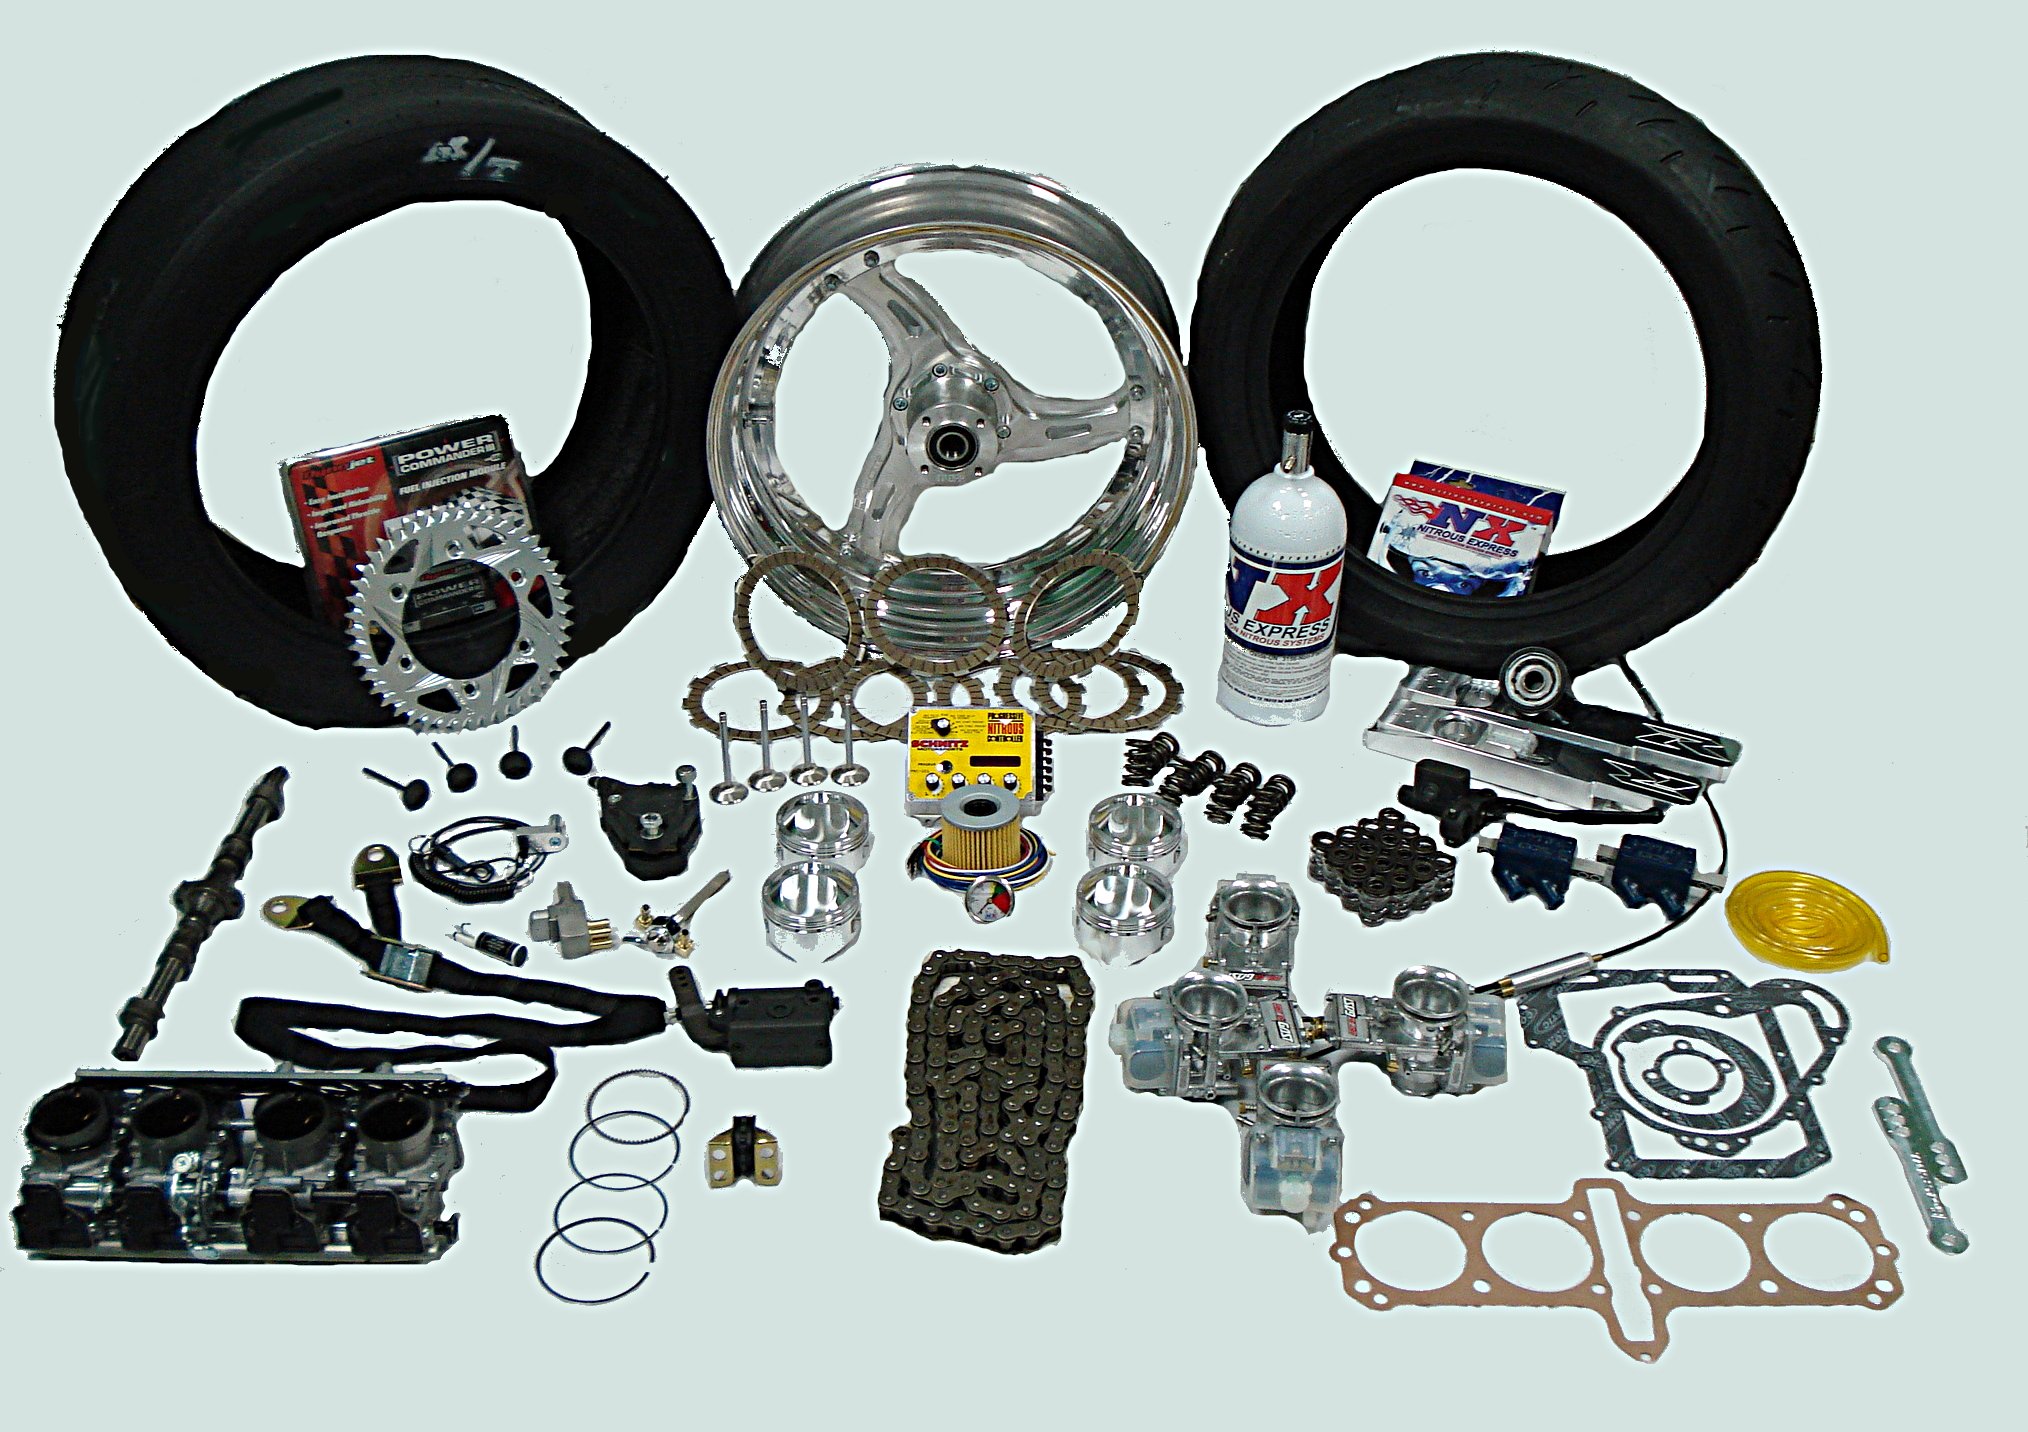 Motobarn Offers Massive Range of Motorcycle Accessories and Gears for the Enthusiast's Ultimate